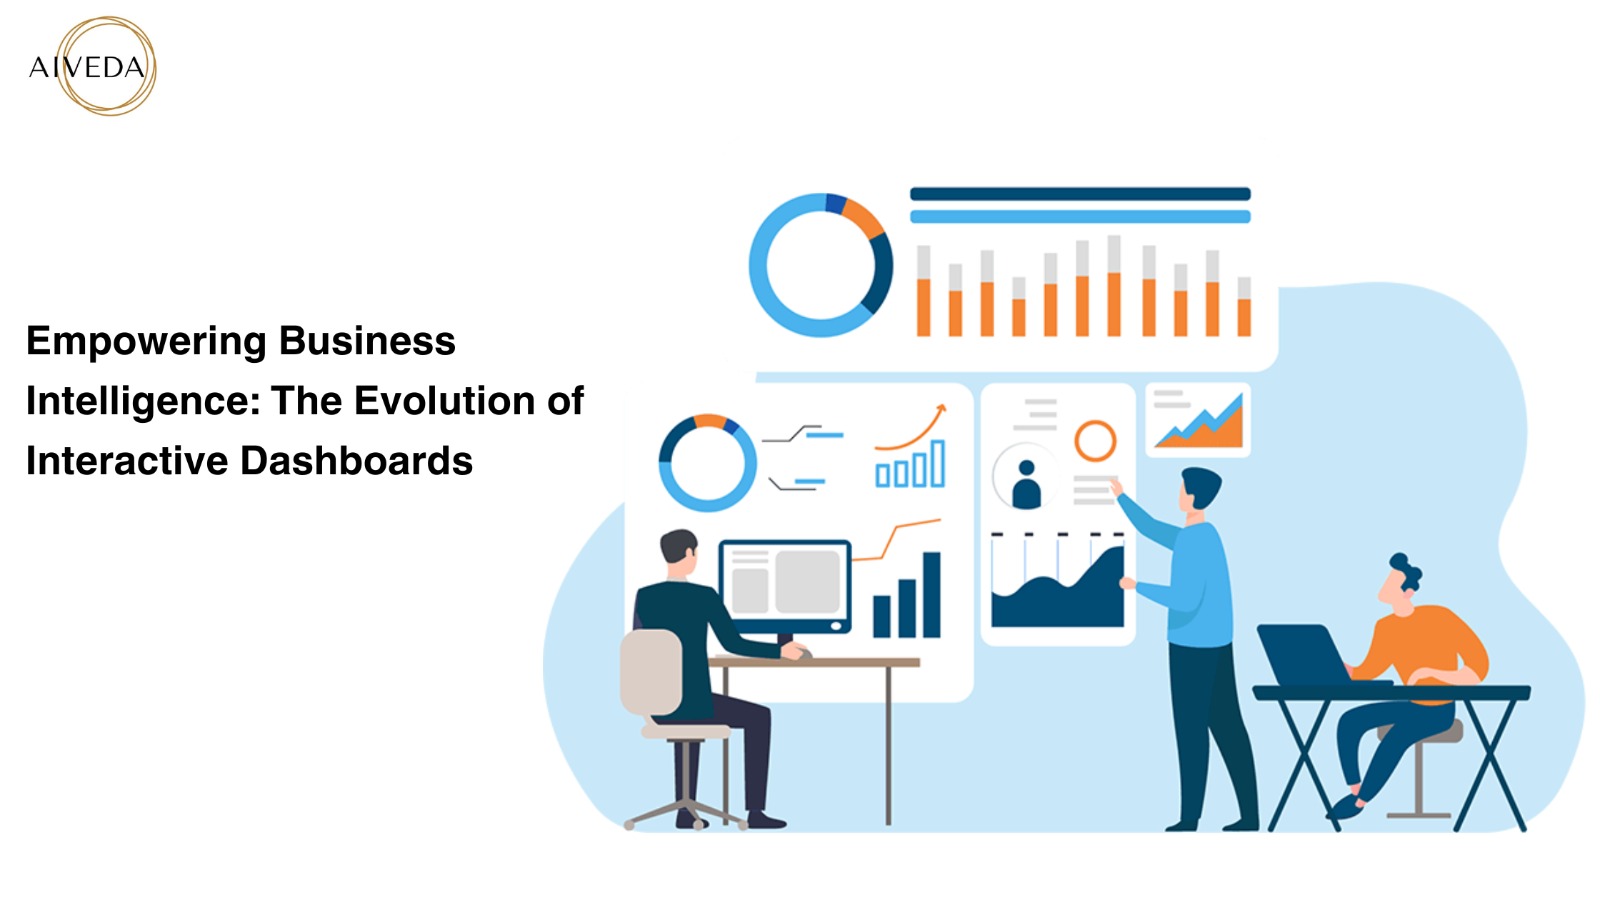 Empowering Business Intelligence: The Evolution of Interactive Dashboards